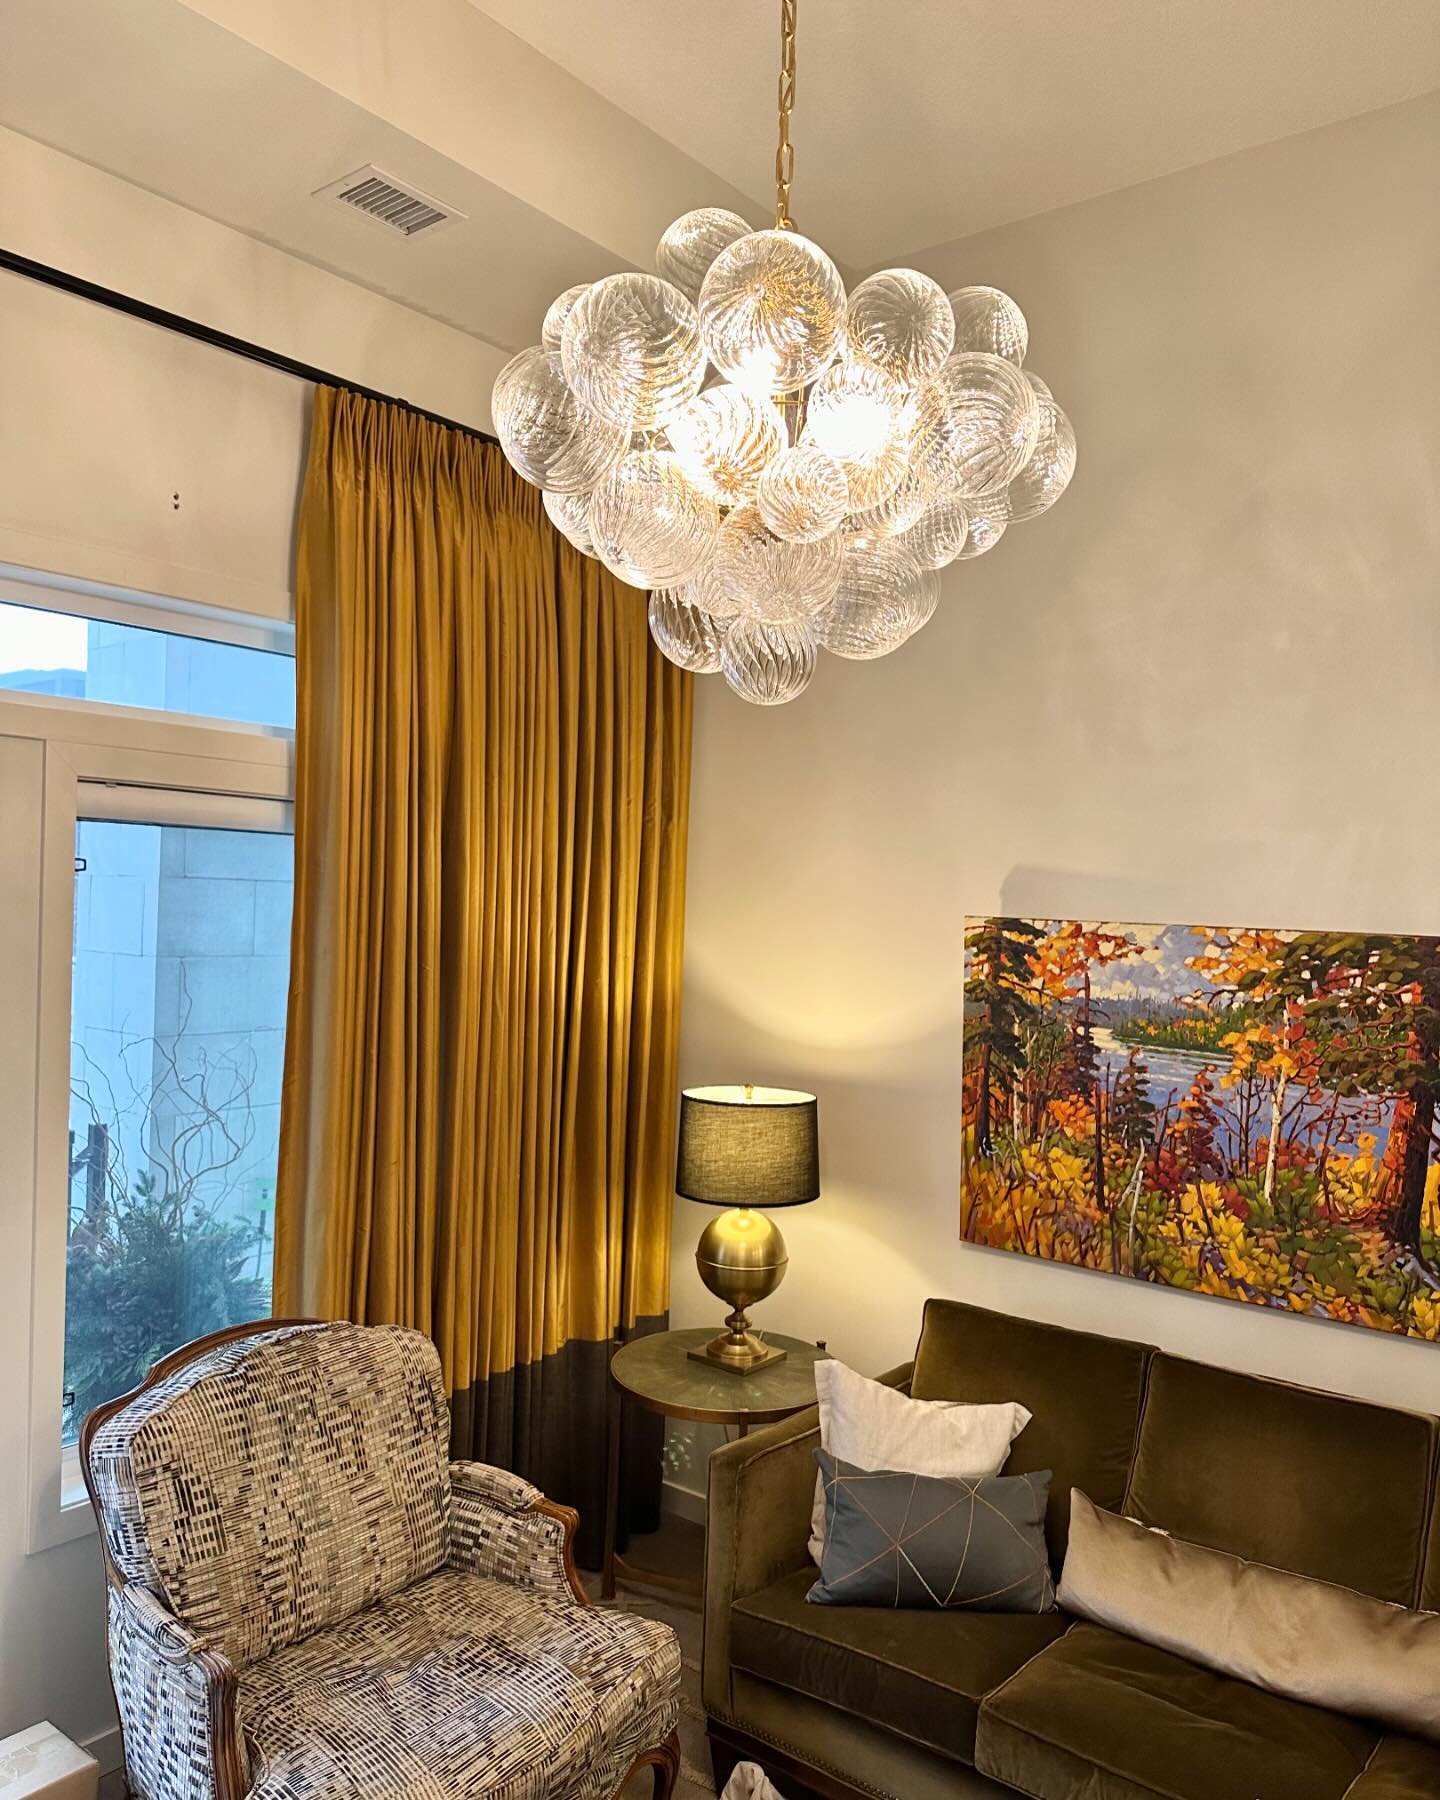 Transforming a builder basic condo into a timeless jewel box, utilizing as many of the homeowner&rsquo;s beloved existing pieces as possible. 

Here&rsquo;s how we did it: 
Relocating the existing fixture to the guest bedroom and replacing it with a 